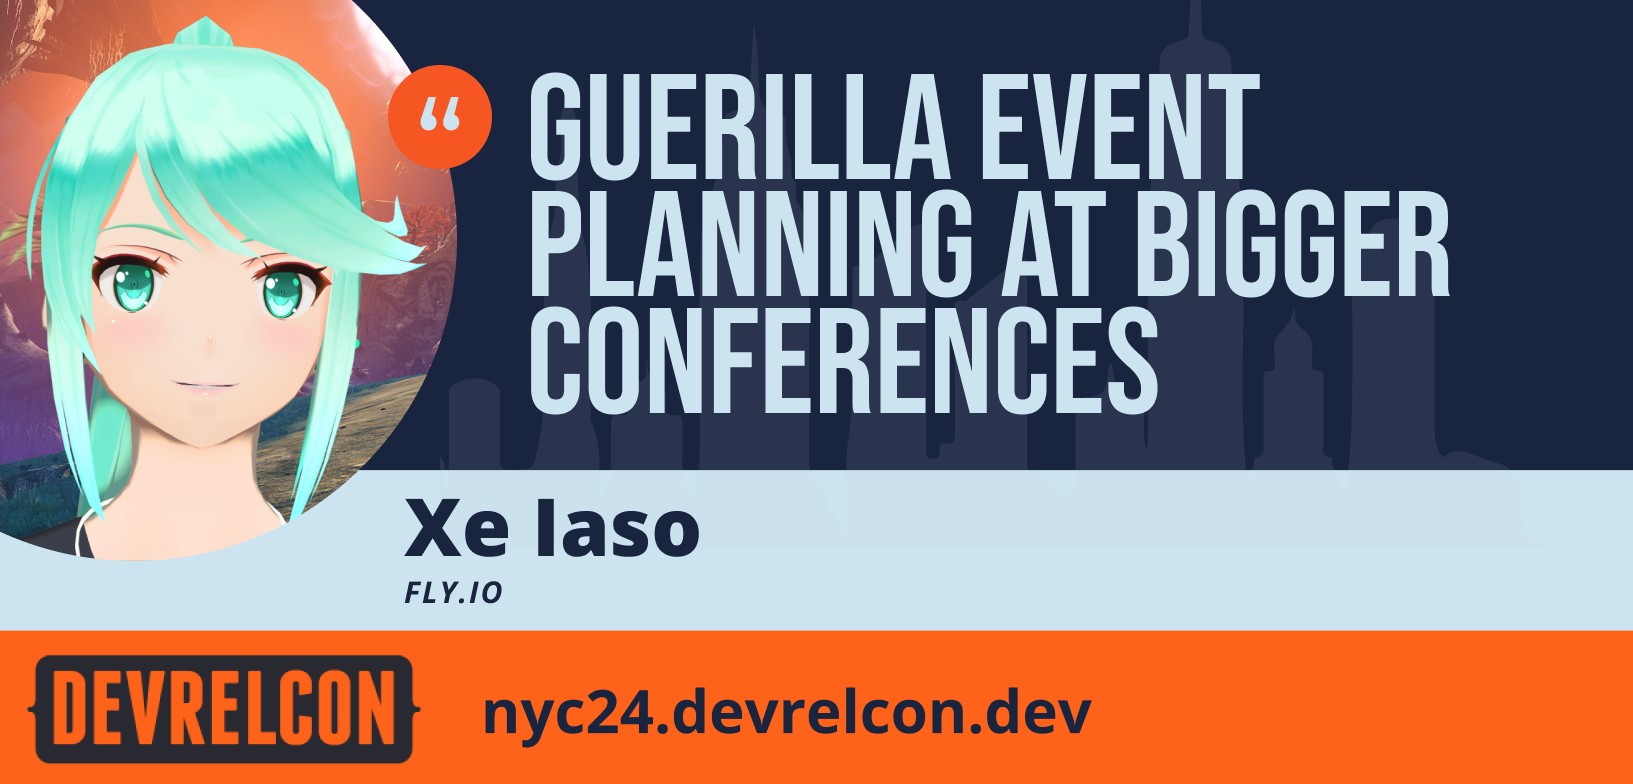 An image of A graphic describing Xe's talk at DevRelCon in NYC about guerilla event planning